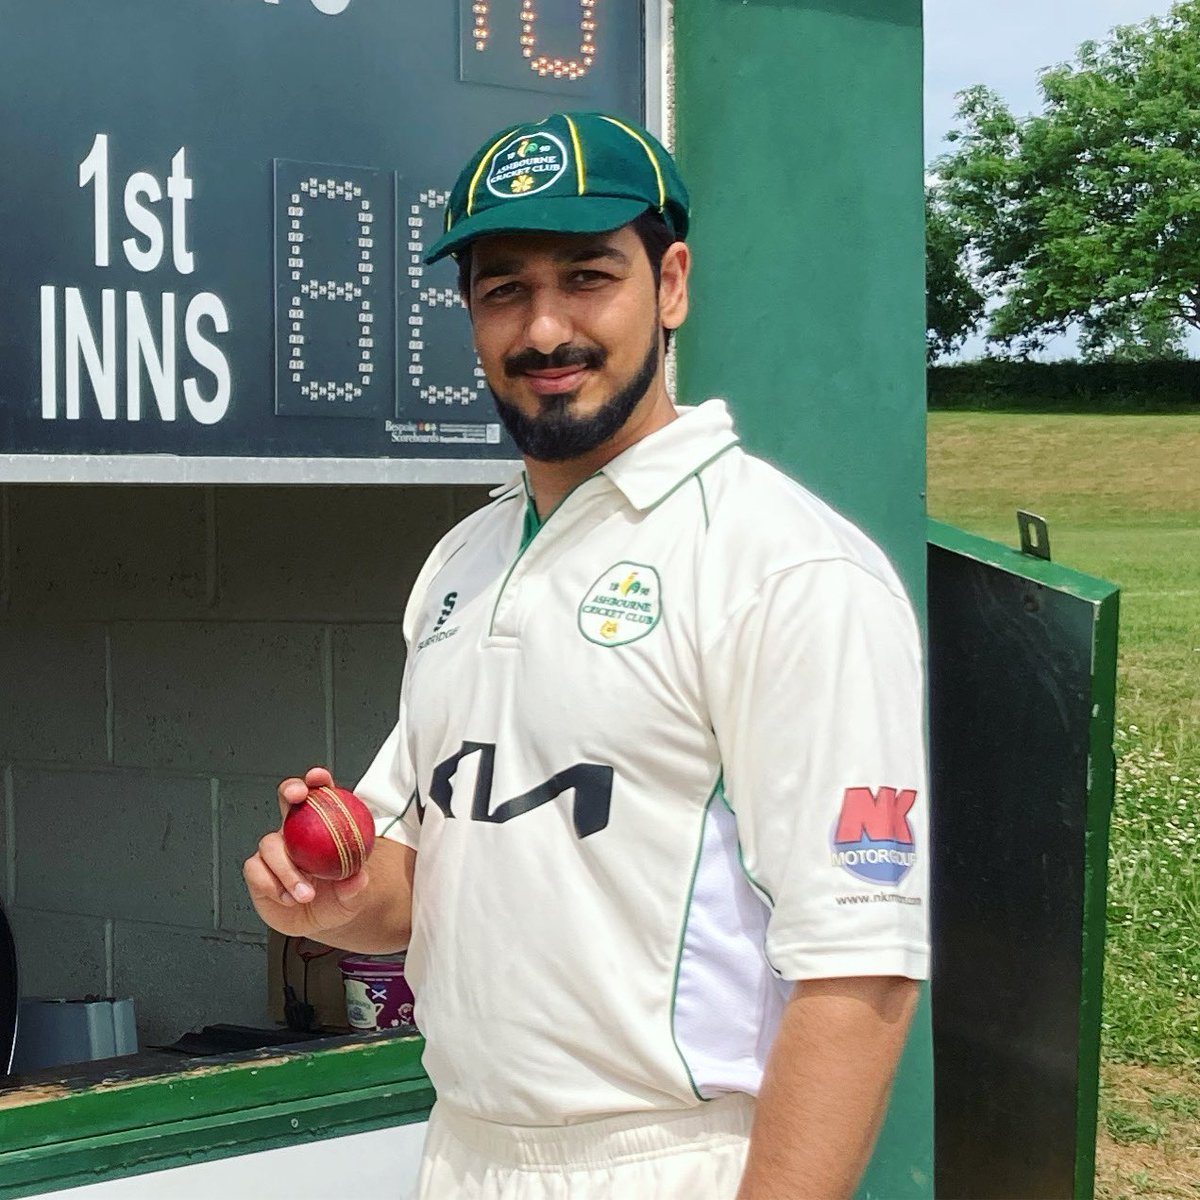 Muj finished off the league’s top wicket-taker! His 4-fer today took him past 50 for the season (52 league and 7 cup wickets). Top bowling!! 👏🏻👏🏻👏🏻